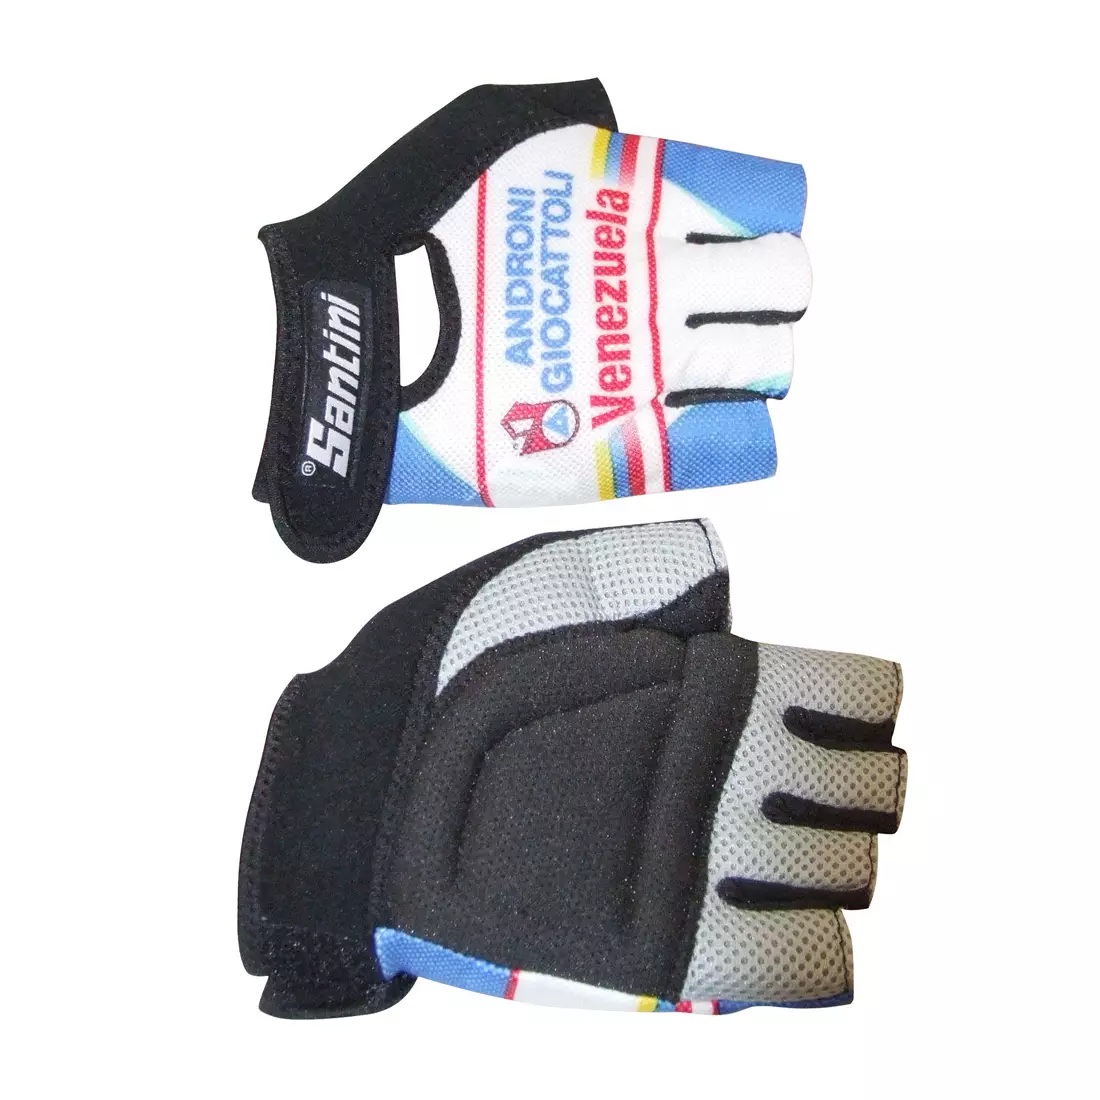 SANTINI - team ANDRONI 2013 - cycling gloves